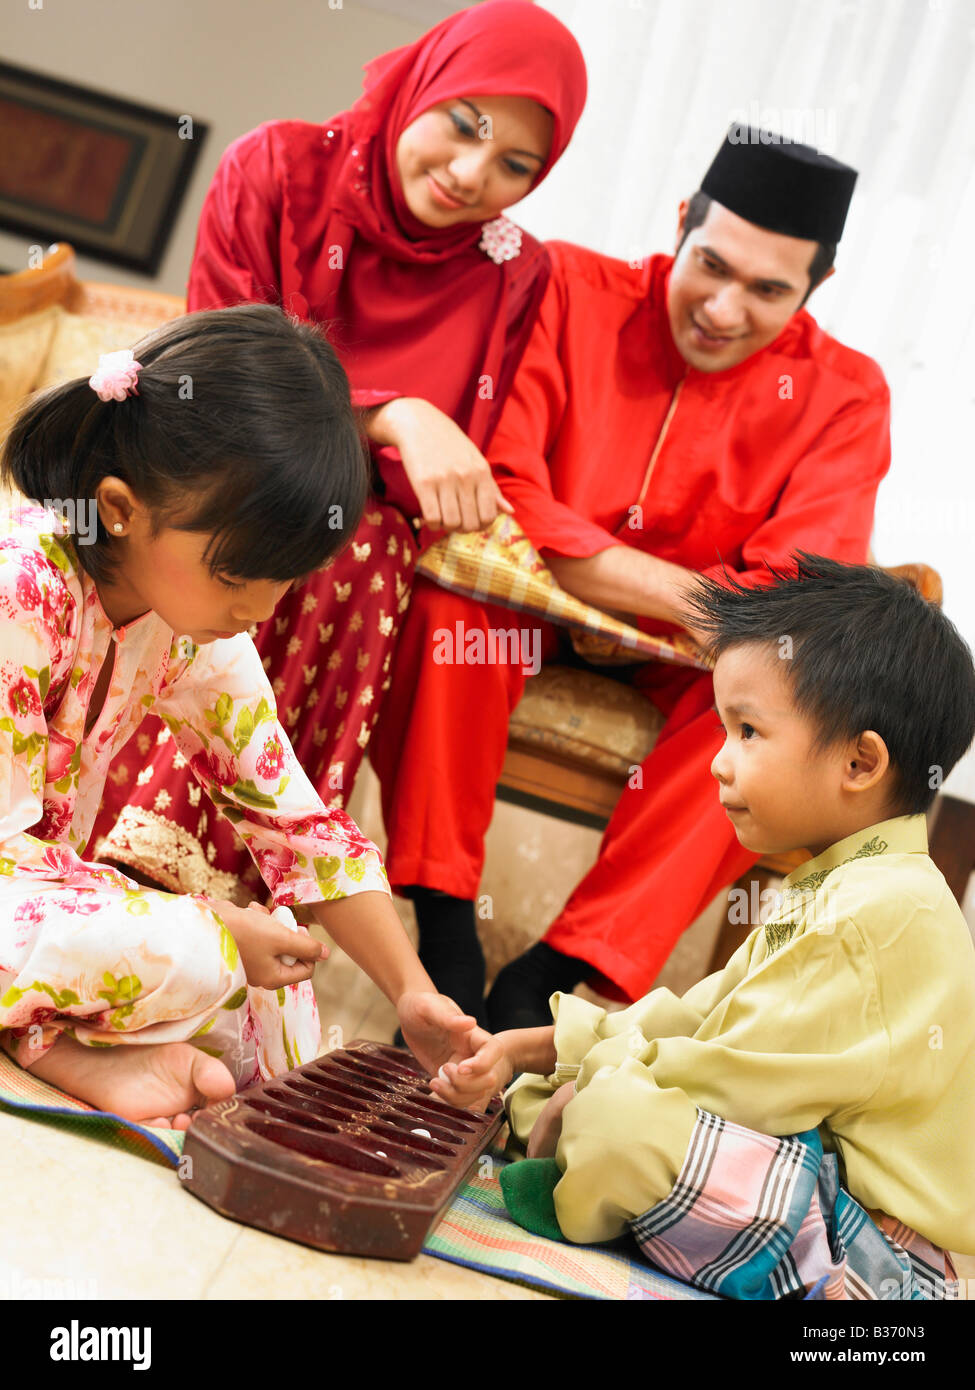 Family of four playing together Stock Photo